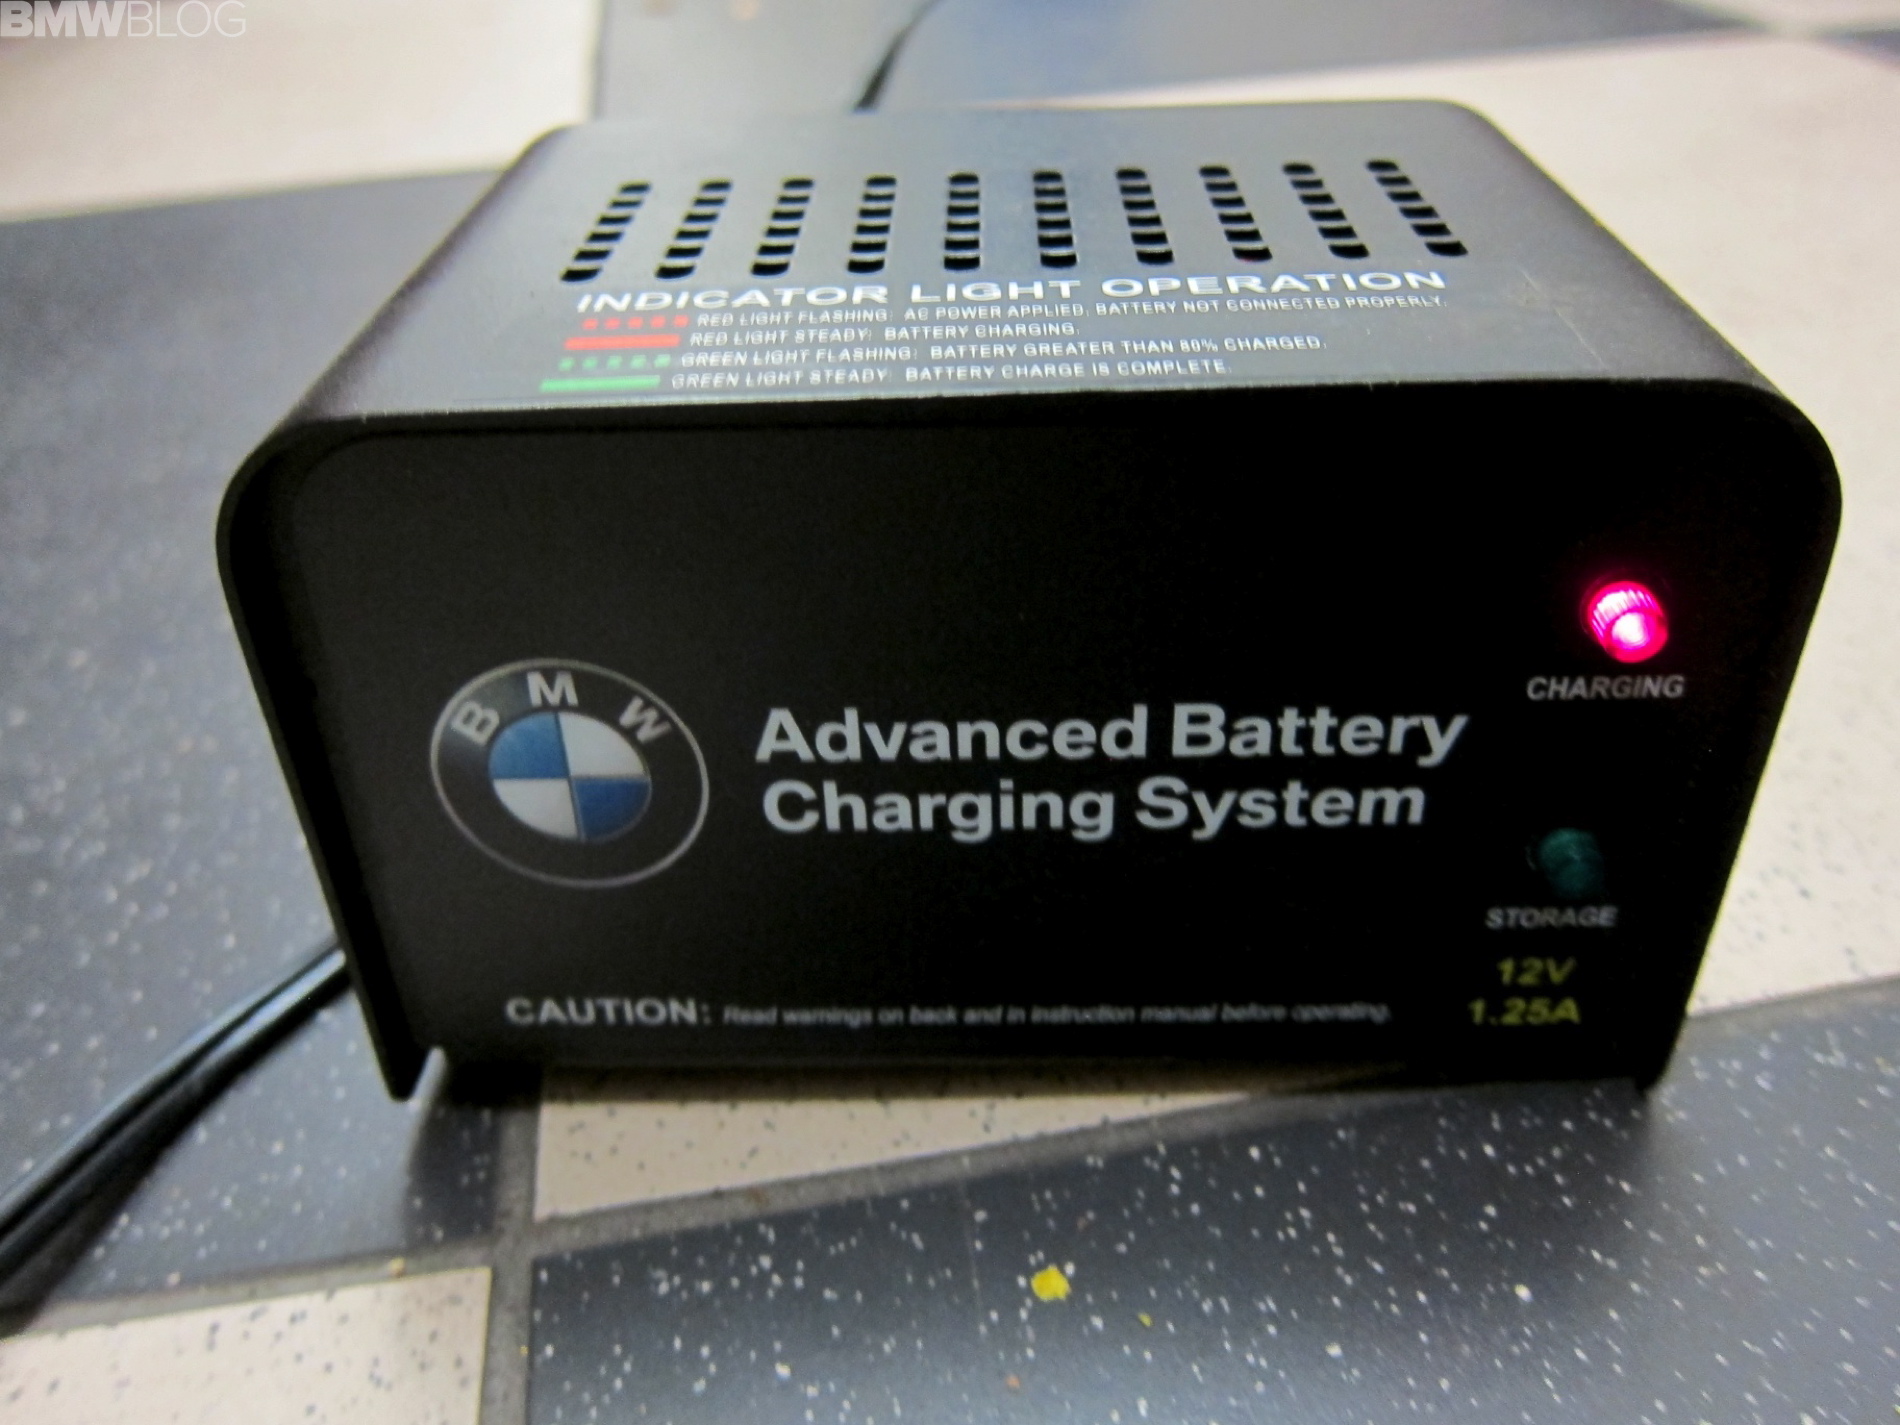 Bmw advanced battery charging system for motorcycles #1